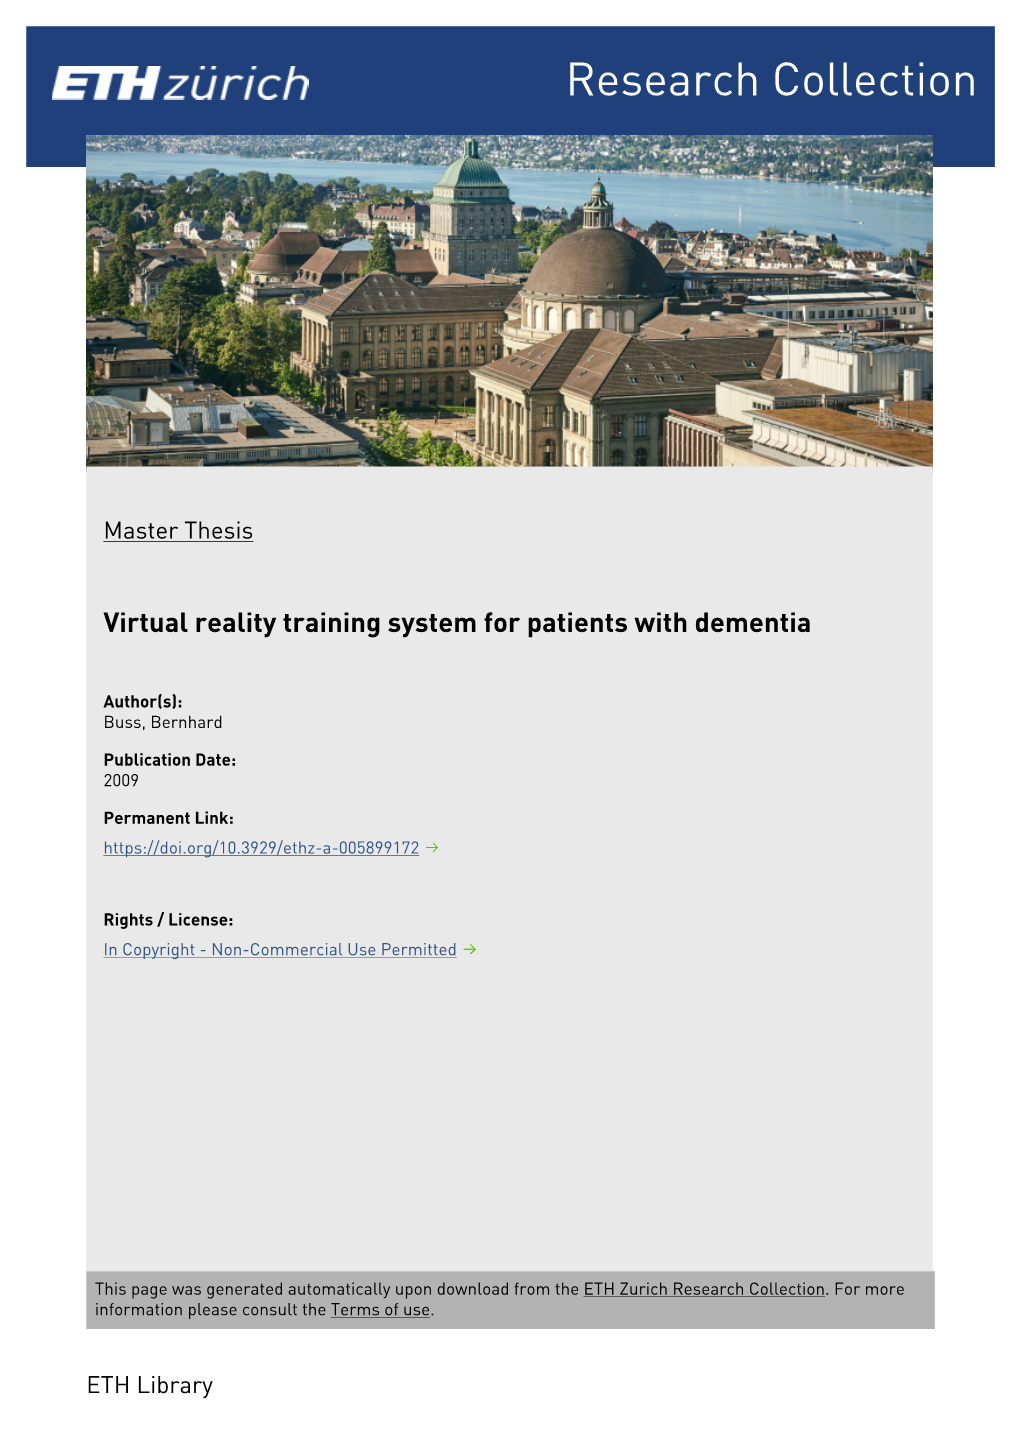 Virtual Reality Training System for Patients with Dementia